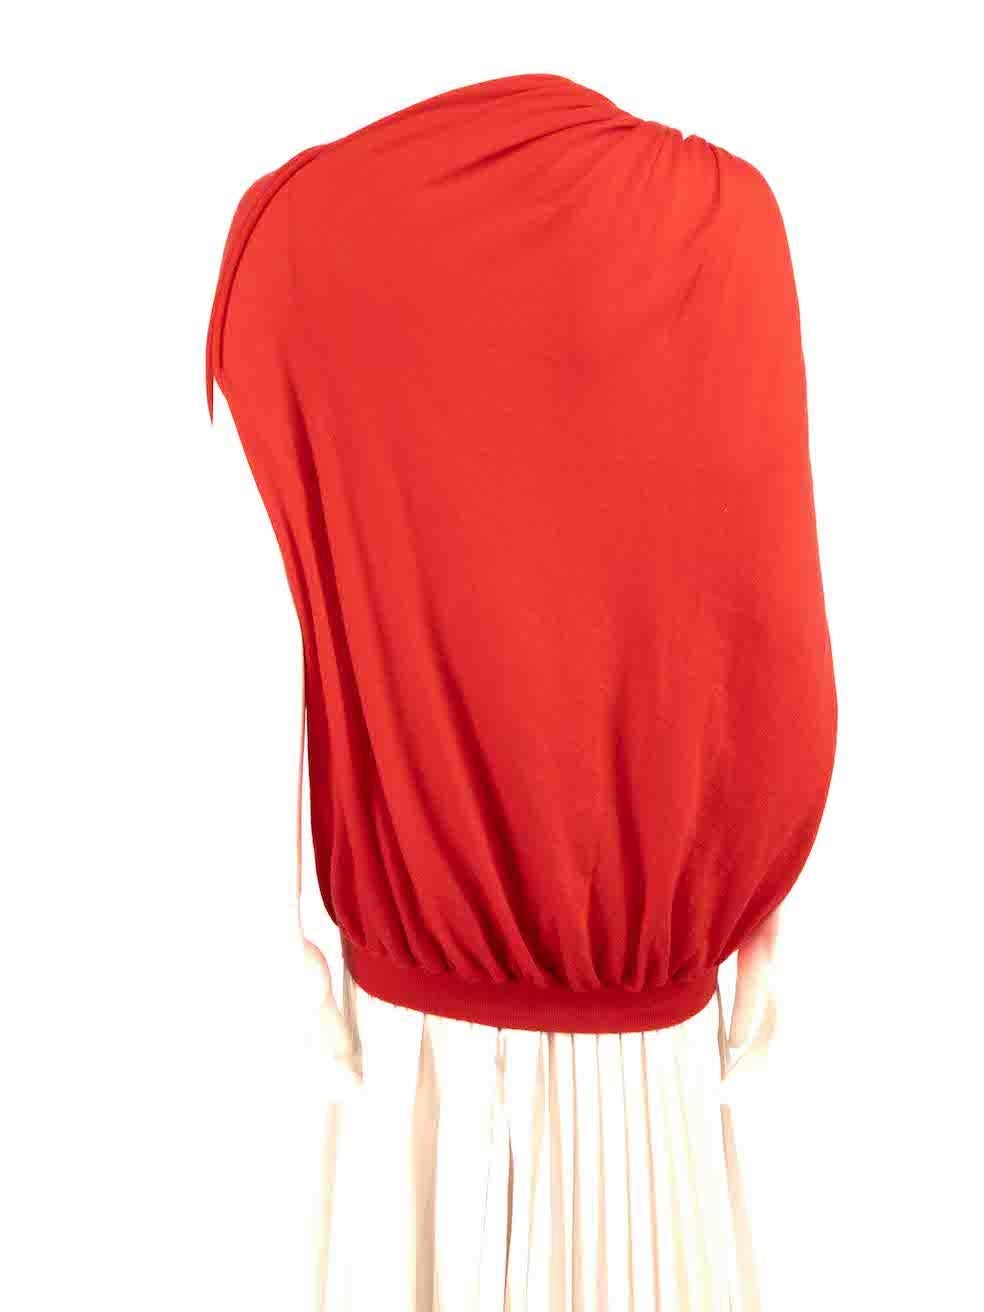 Lanvin Red Cashmere Fine Knit Draped Shoulder Top Size S In Good Condition For Sale In London, GB